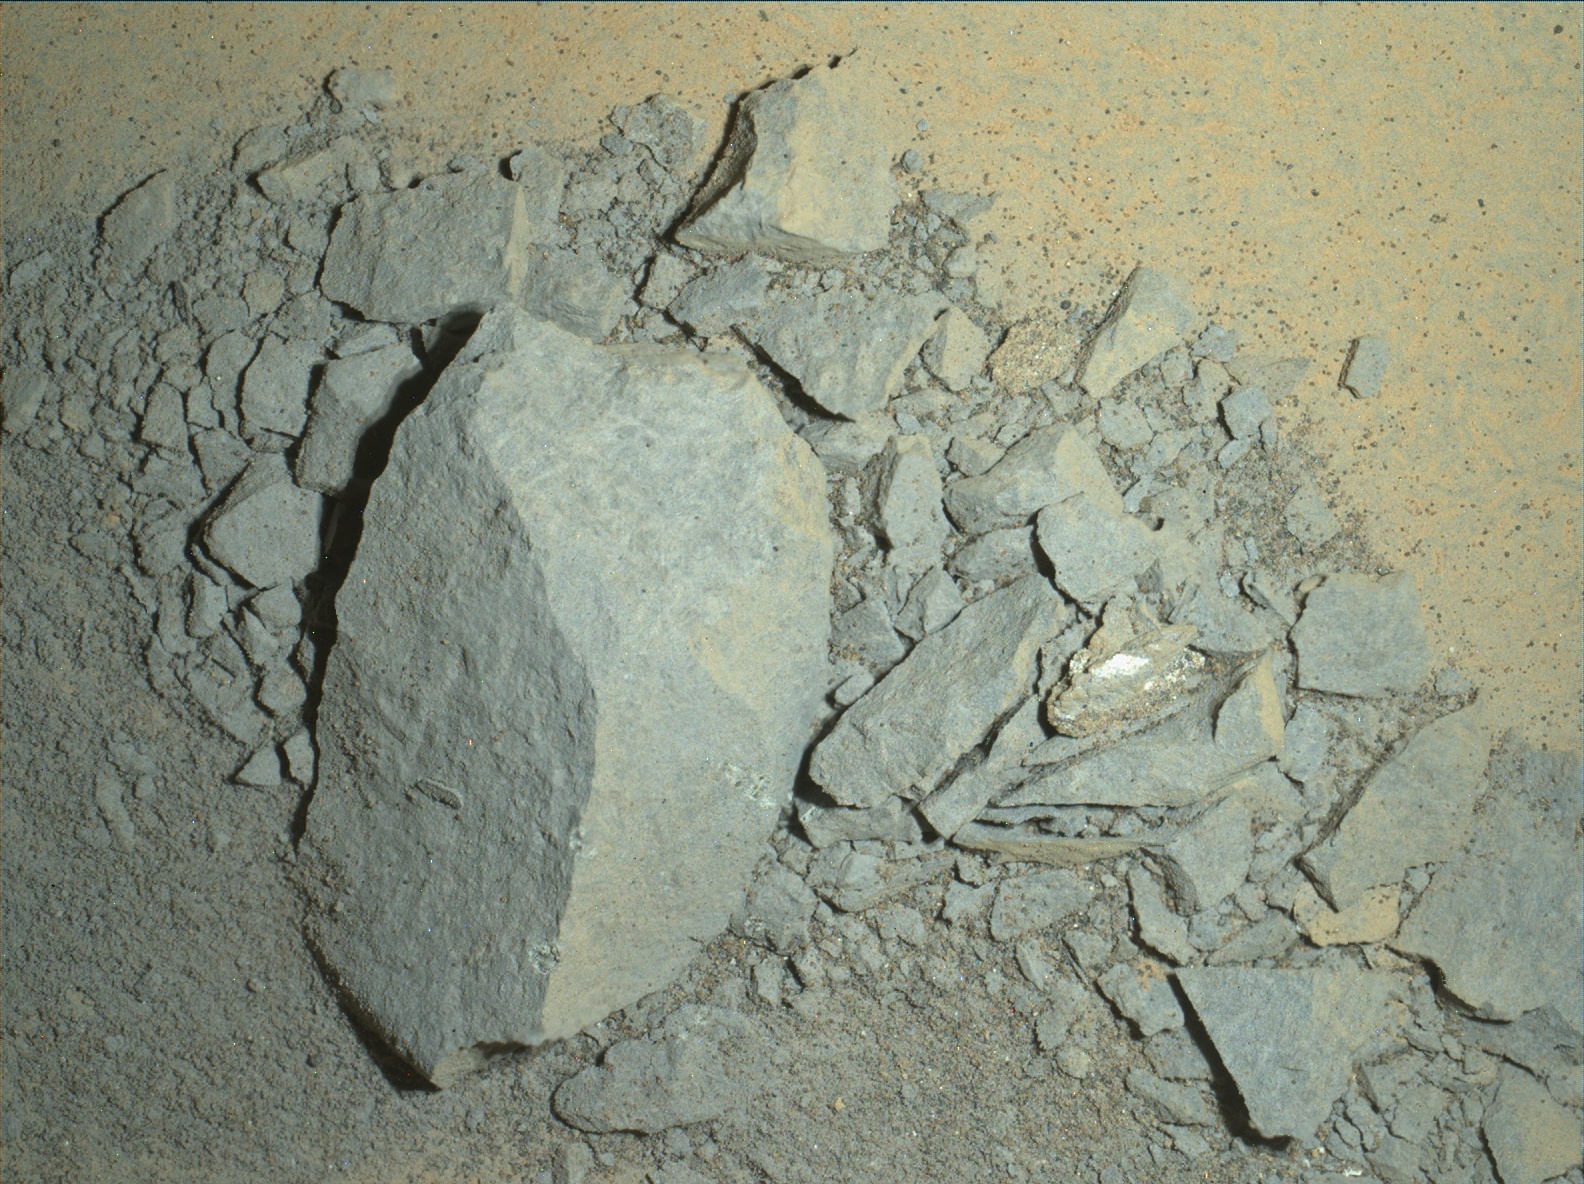 Nasa's Mars rover Curiosity acquired this image using its Mars Hand Lens Imager (MAHLI) on Sol 880